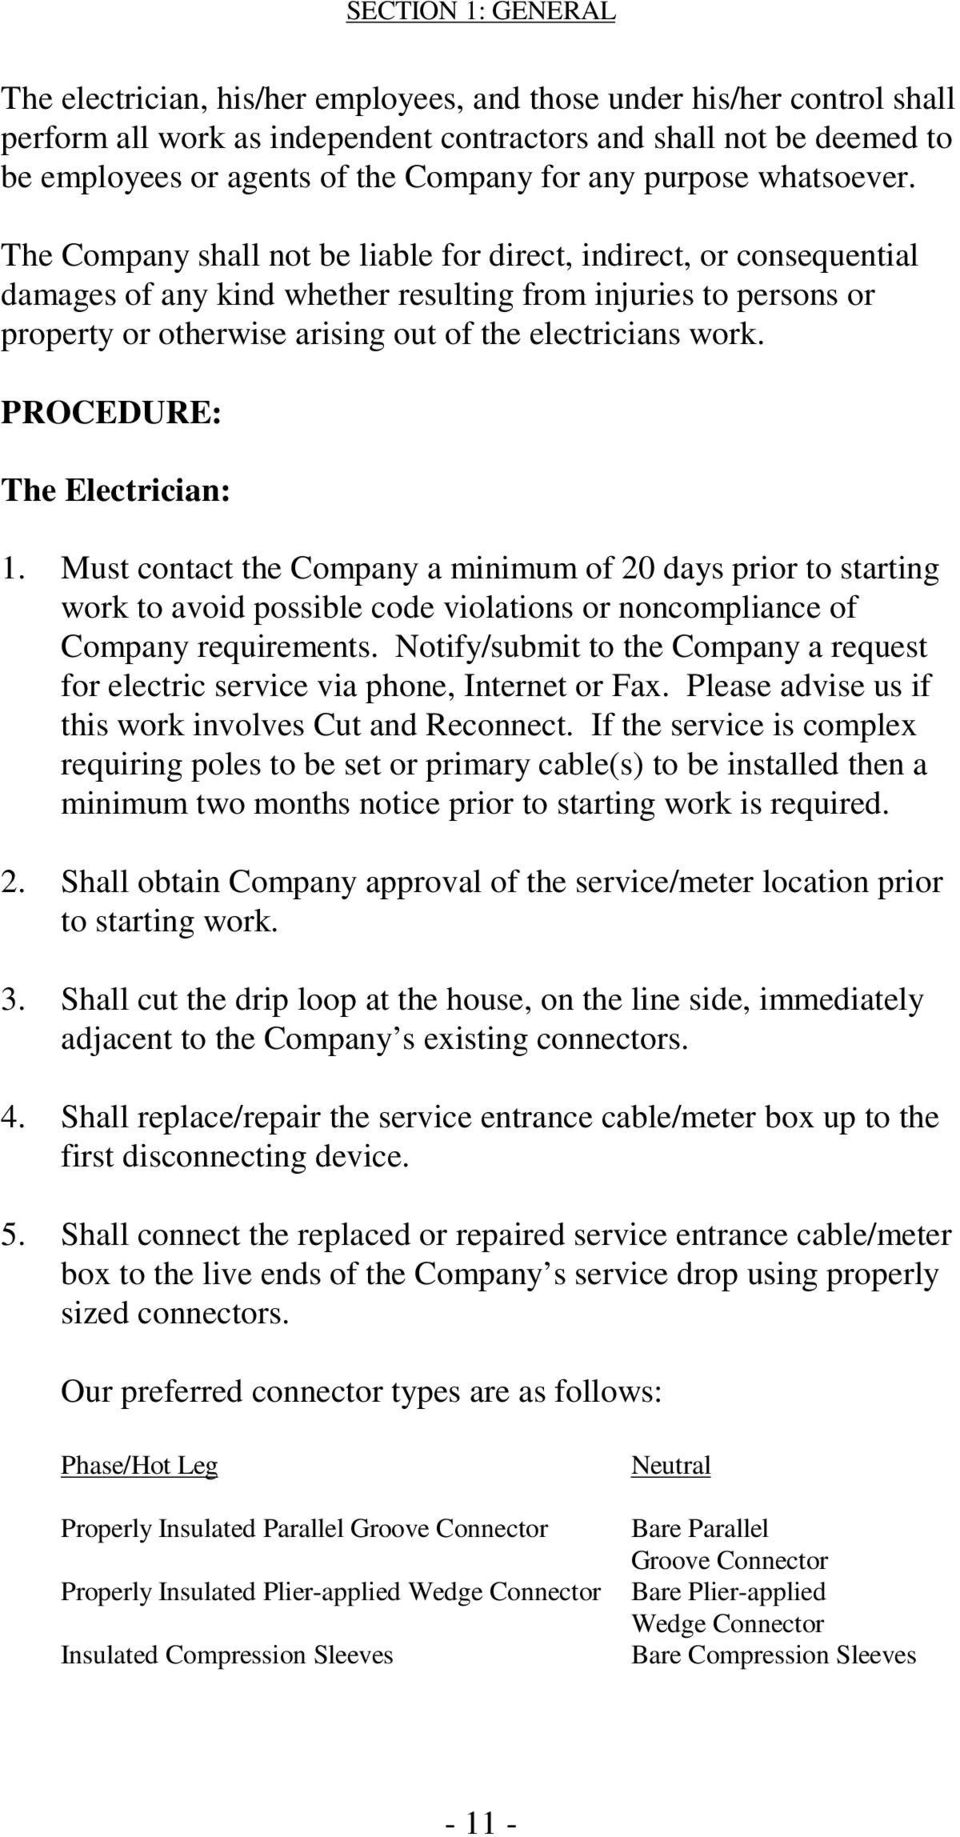 The Company shall not be liable for direct, indirect, or consequential damages of any kind whether resulting from injuries to persons or property or otherwise arising out of the electricians work.